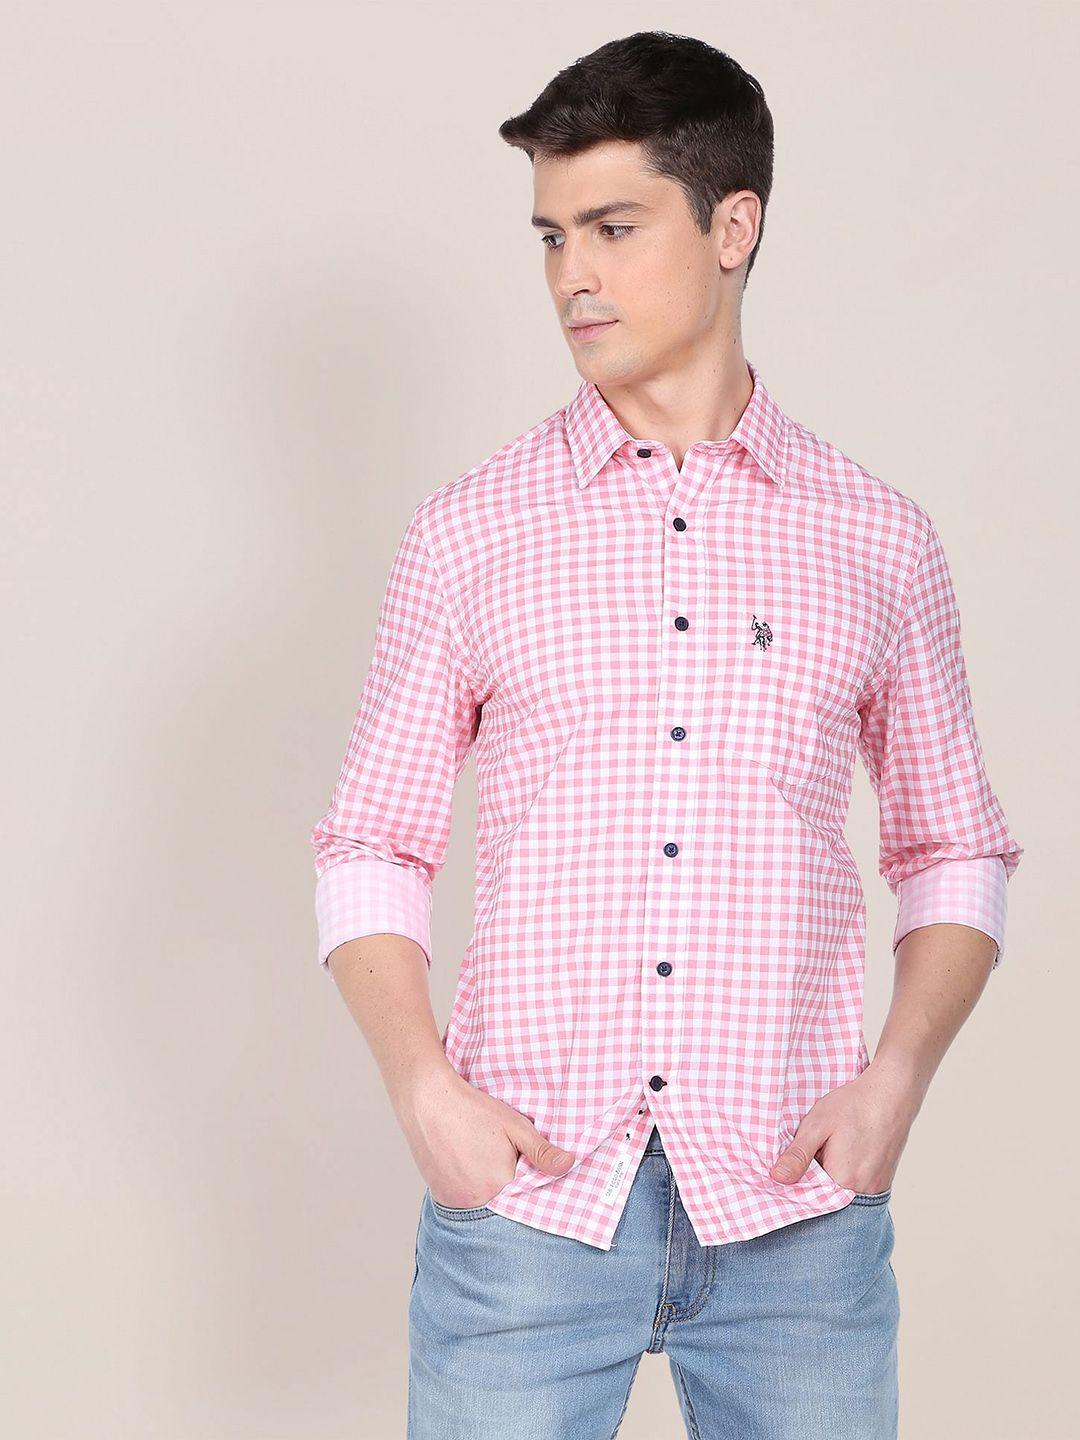 U.S. Polo Assn. Men Pink & White Gingham Twill Checked Pure Cotton Casual Shirt